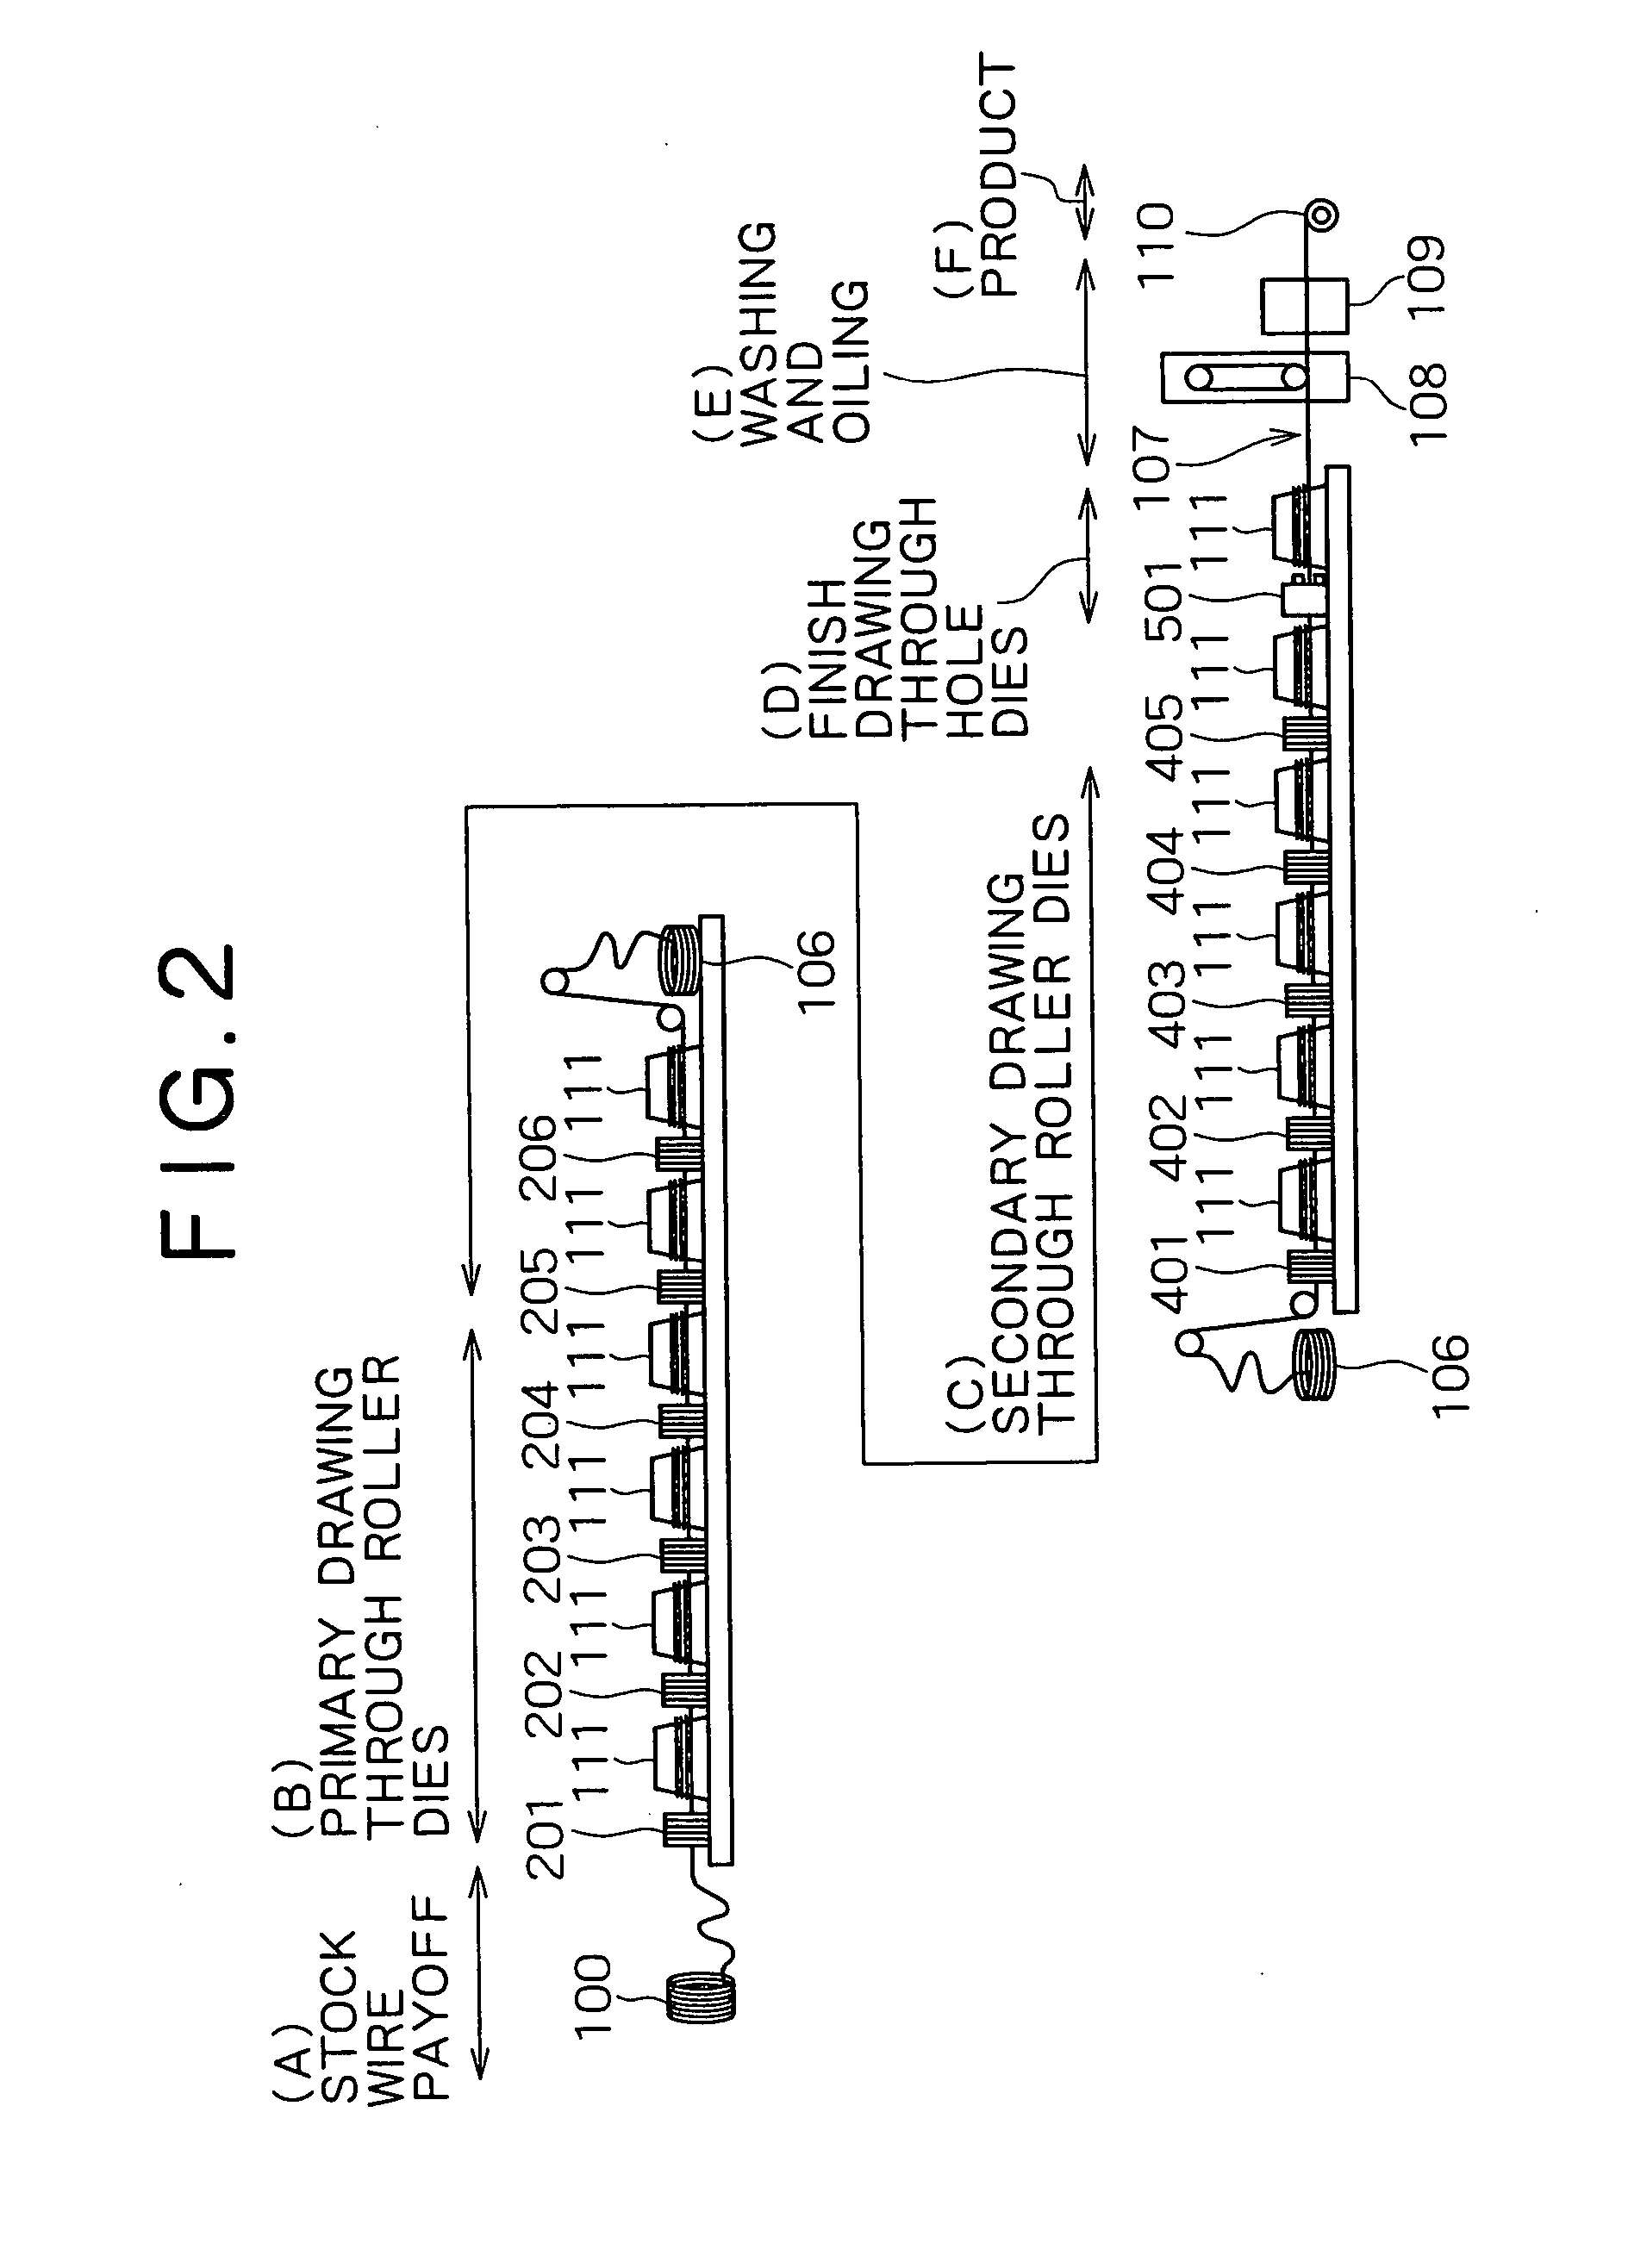 Method of producing solid wire for welding